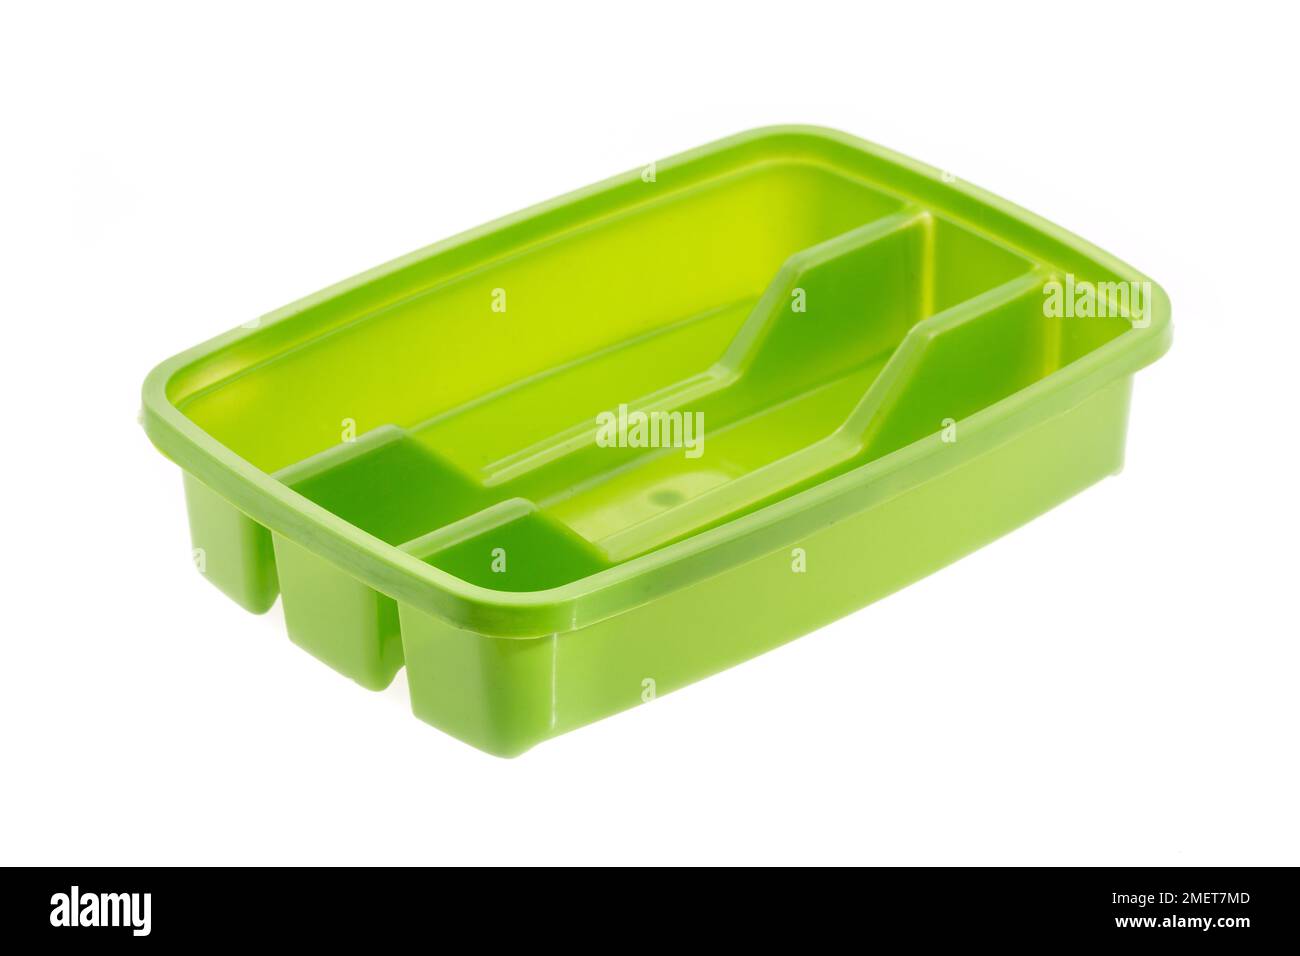 Plastic Container With Compartments To Organize Table Cutlery. Stock Photo